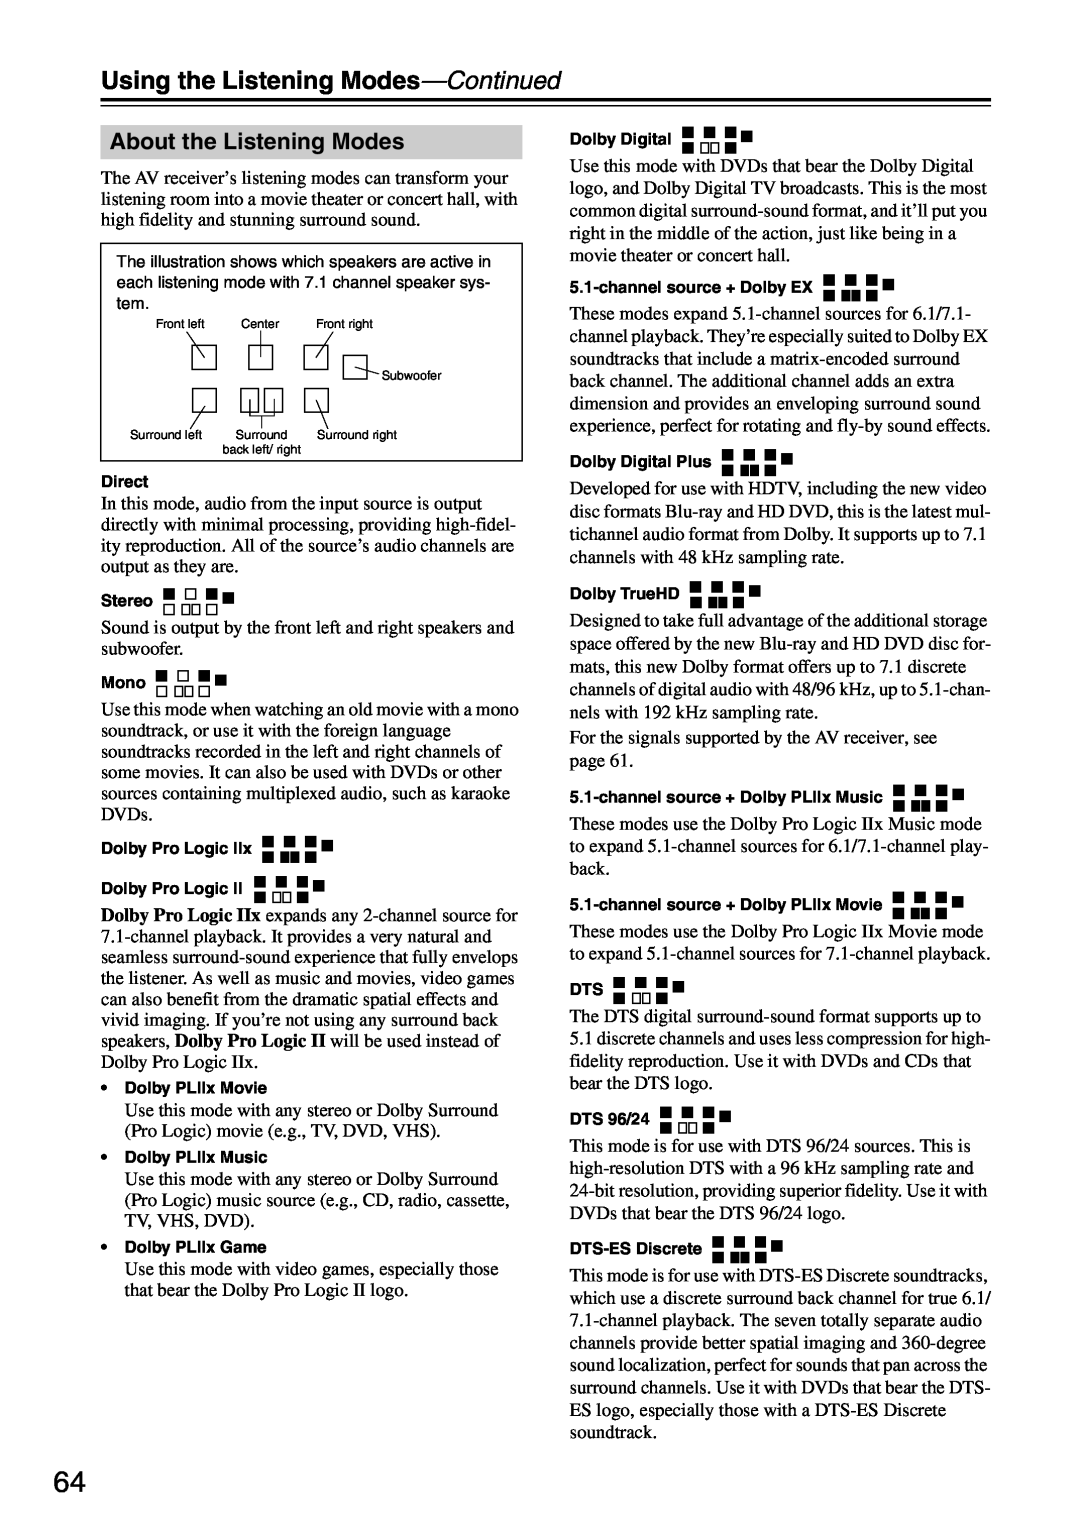 Integra DTR-5.8 instruction manual About the Listening Modes, Using the Listening Modes—Continued 